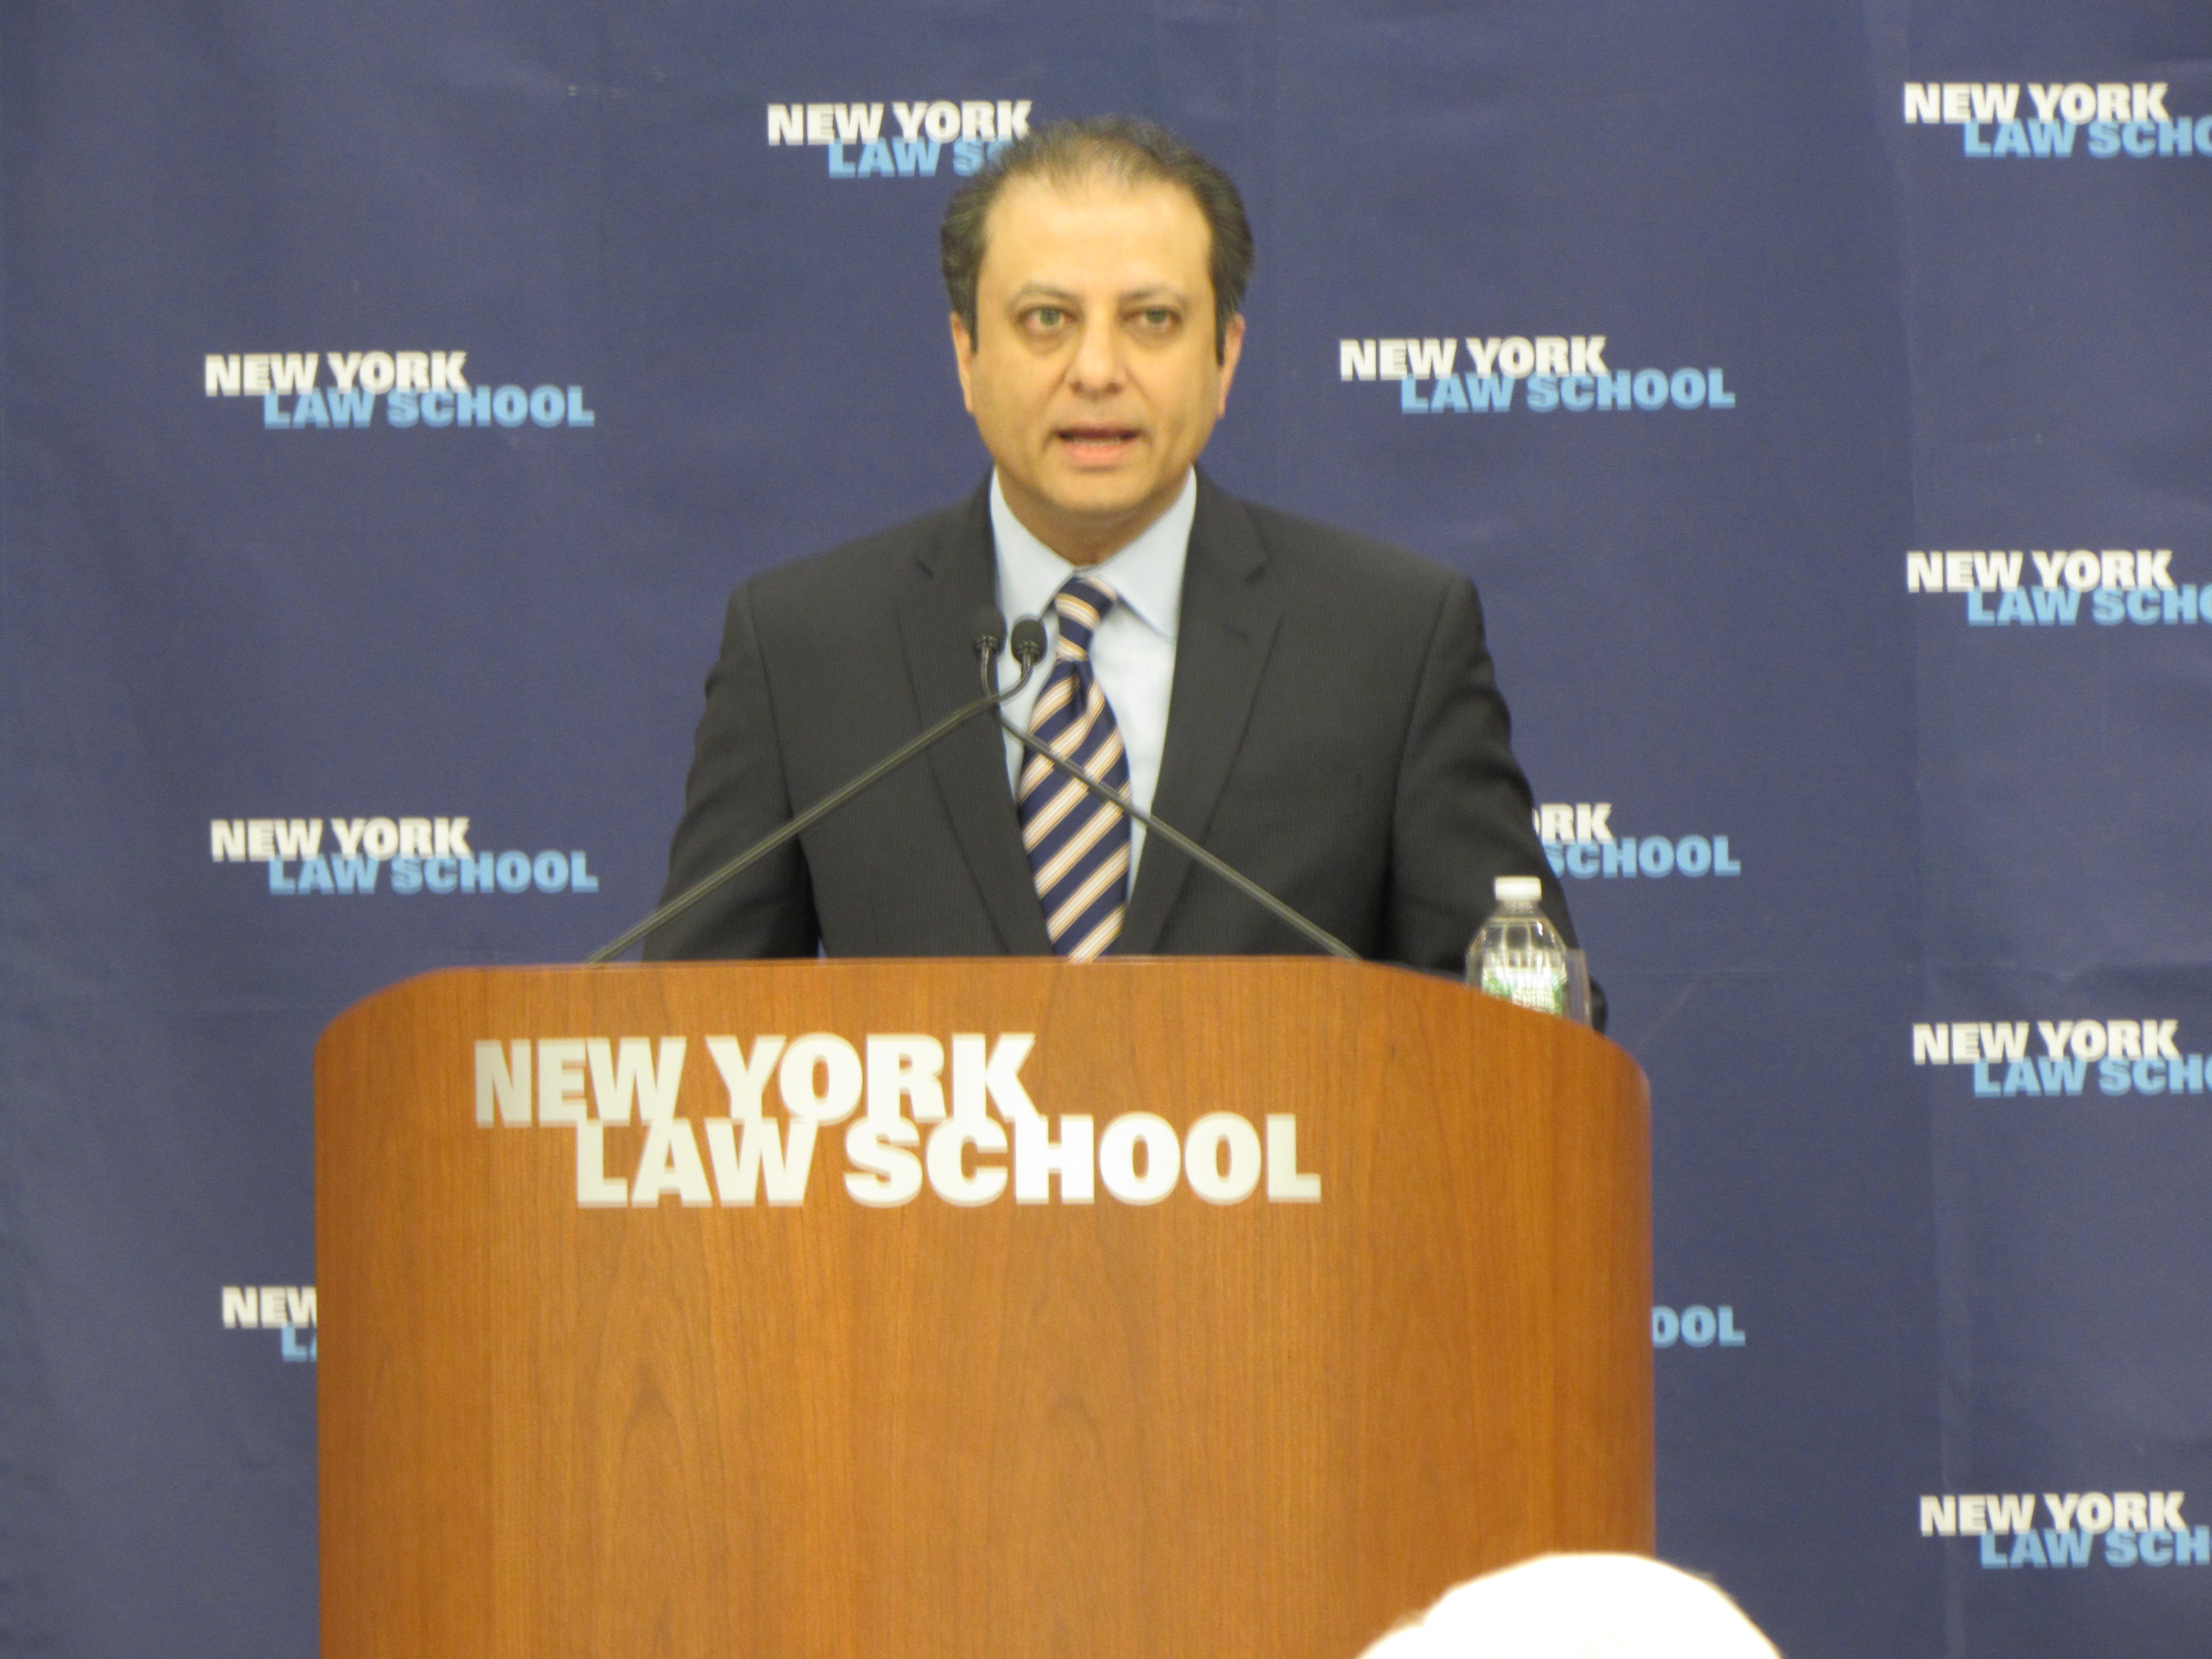 Preet Bharara, U.S. Attorney for the Southern District of New York, speaks at the 118th CityLaw Breakfast.  Image credit: CityLand